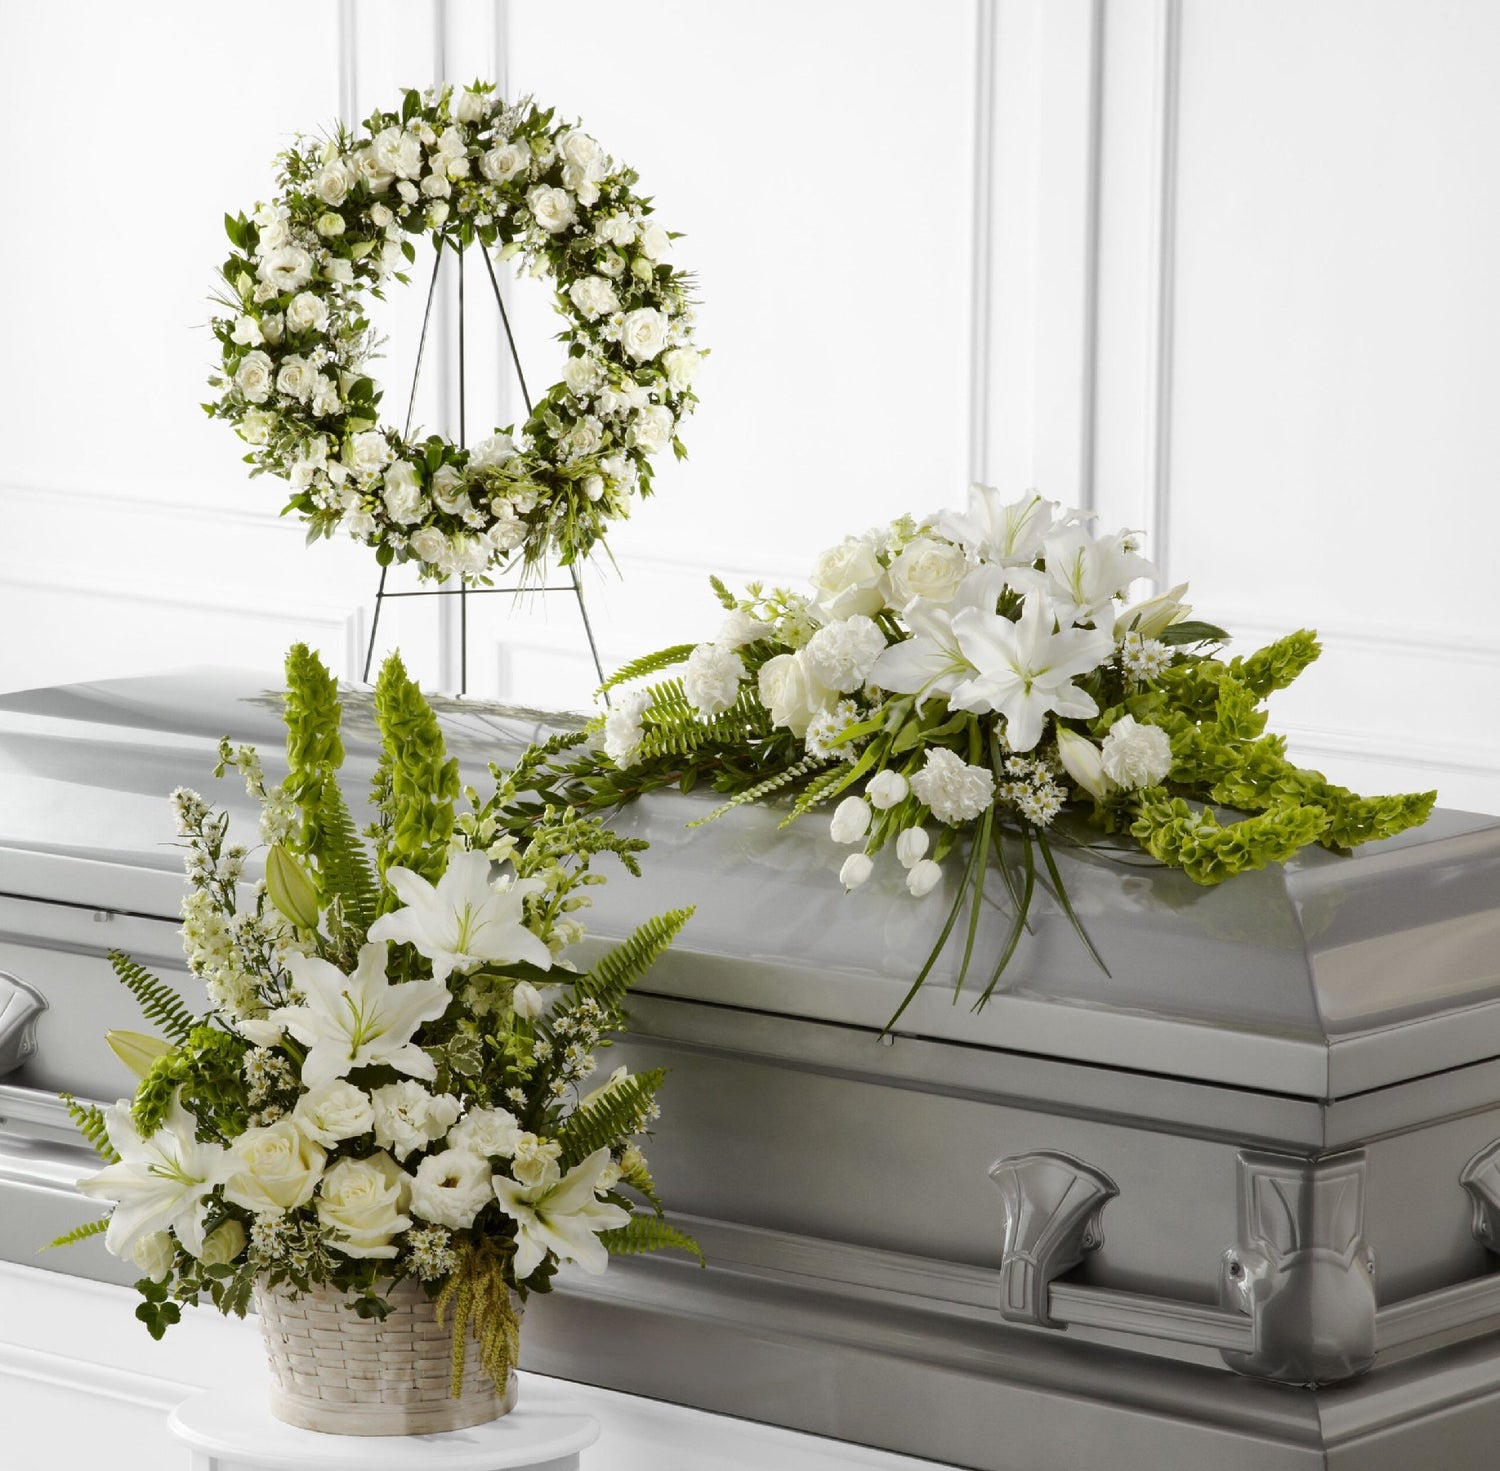 Funeral Floral Wreath - Flower Delivery NYC